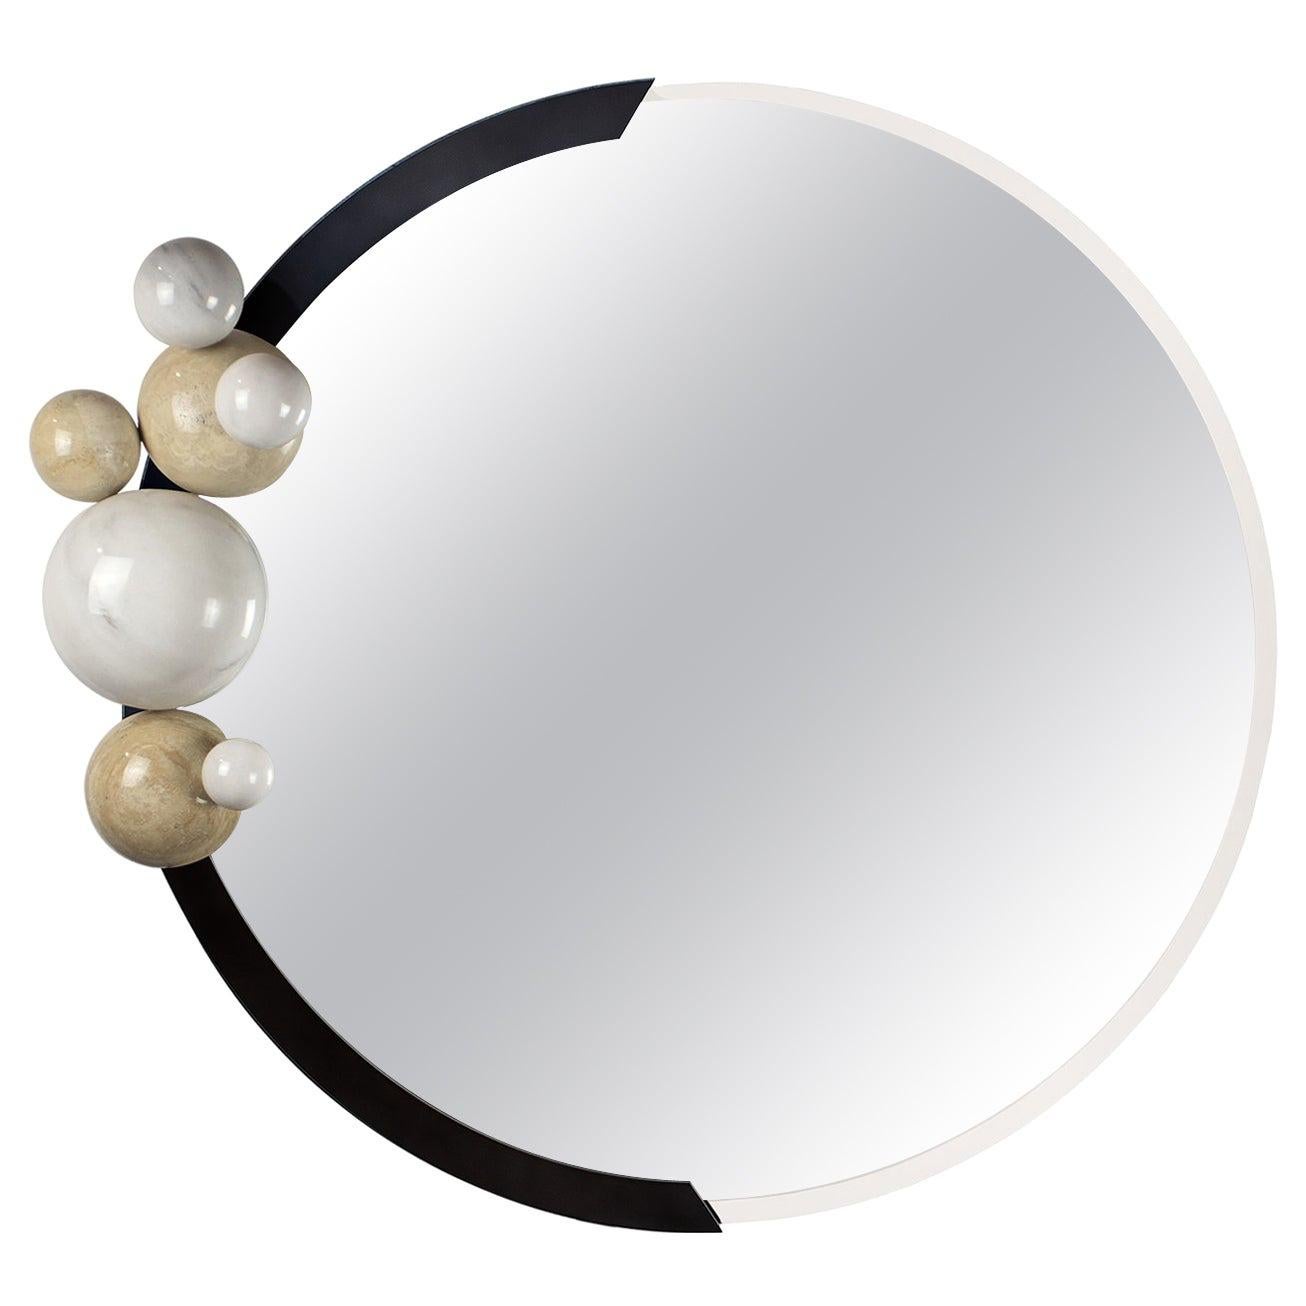 21st Century Modern Wall Mirror White Marble Spheres With Incorporated Light